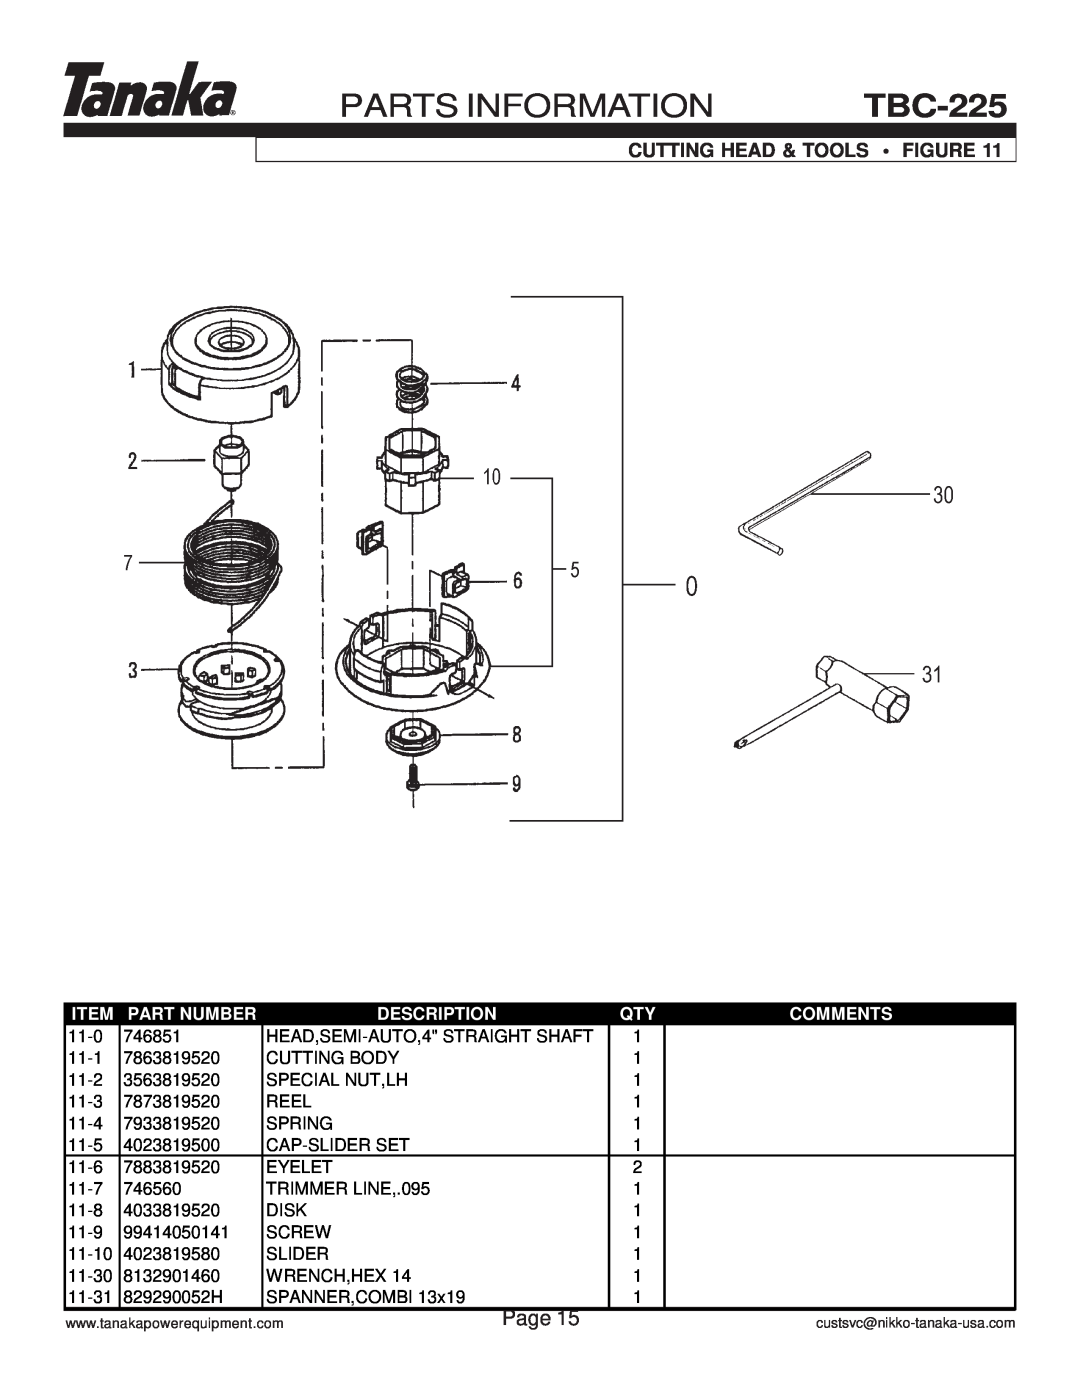 Tanaka TBC-225 manual Parts Information, Page, Cutting Head & Tools Figure, Part Number, Description, Comments 